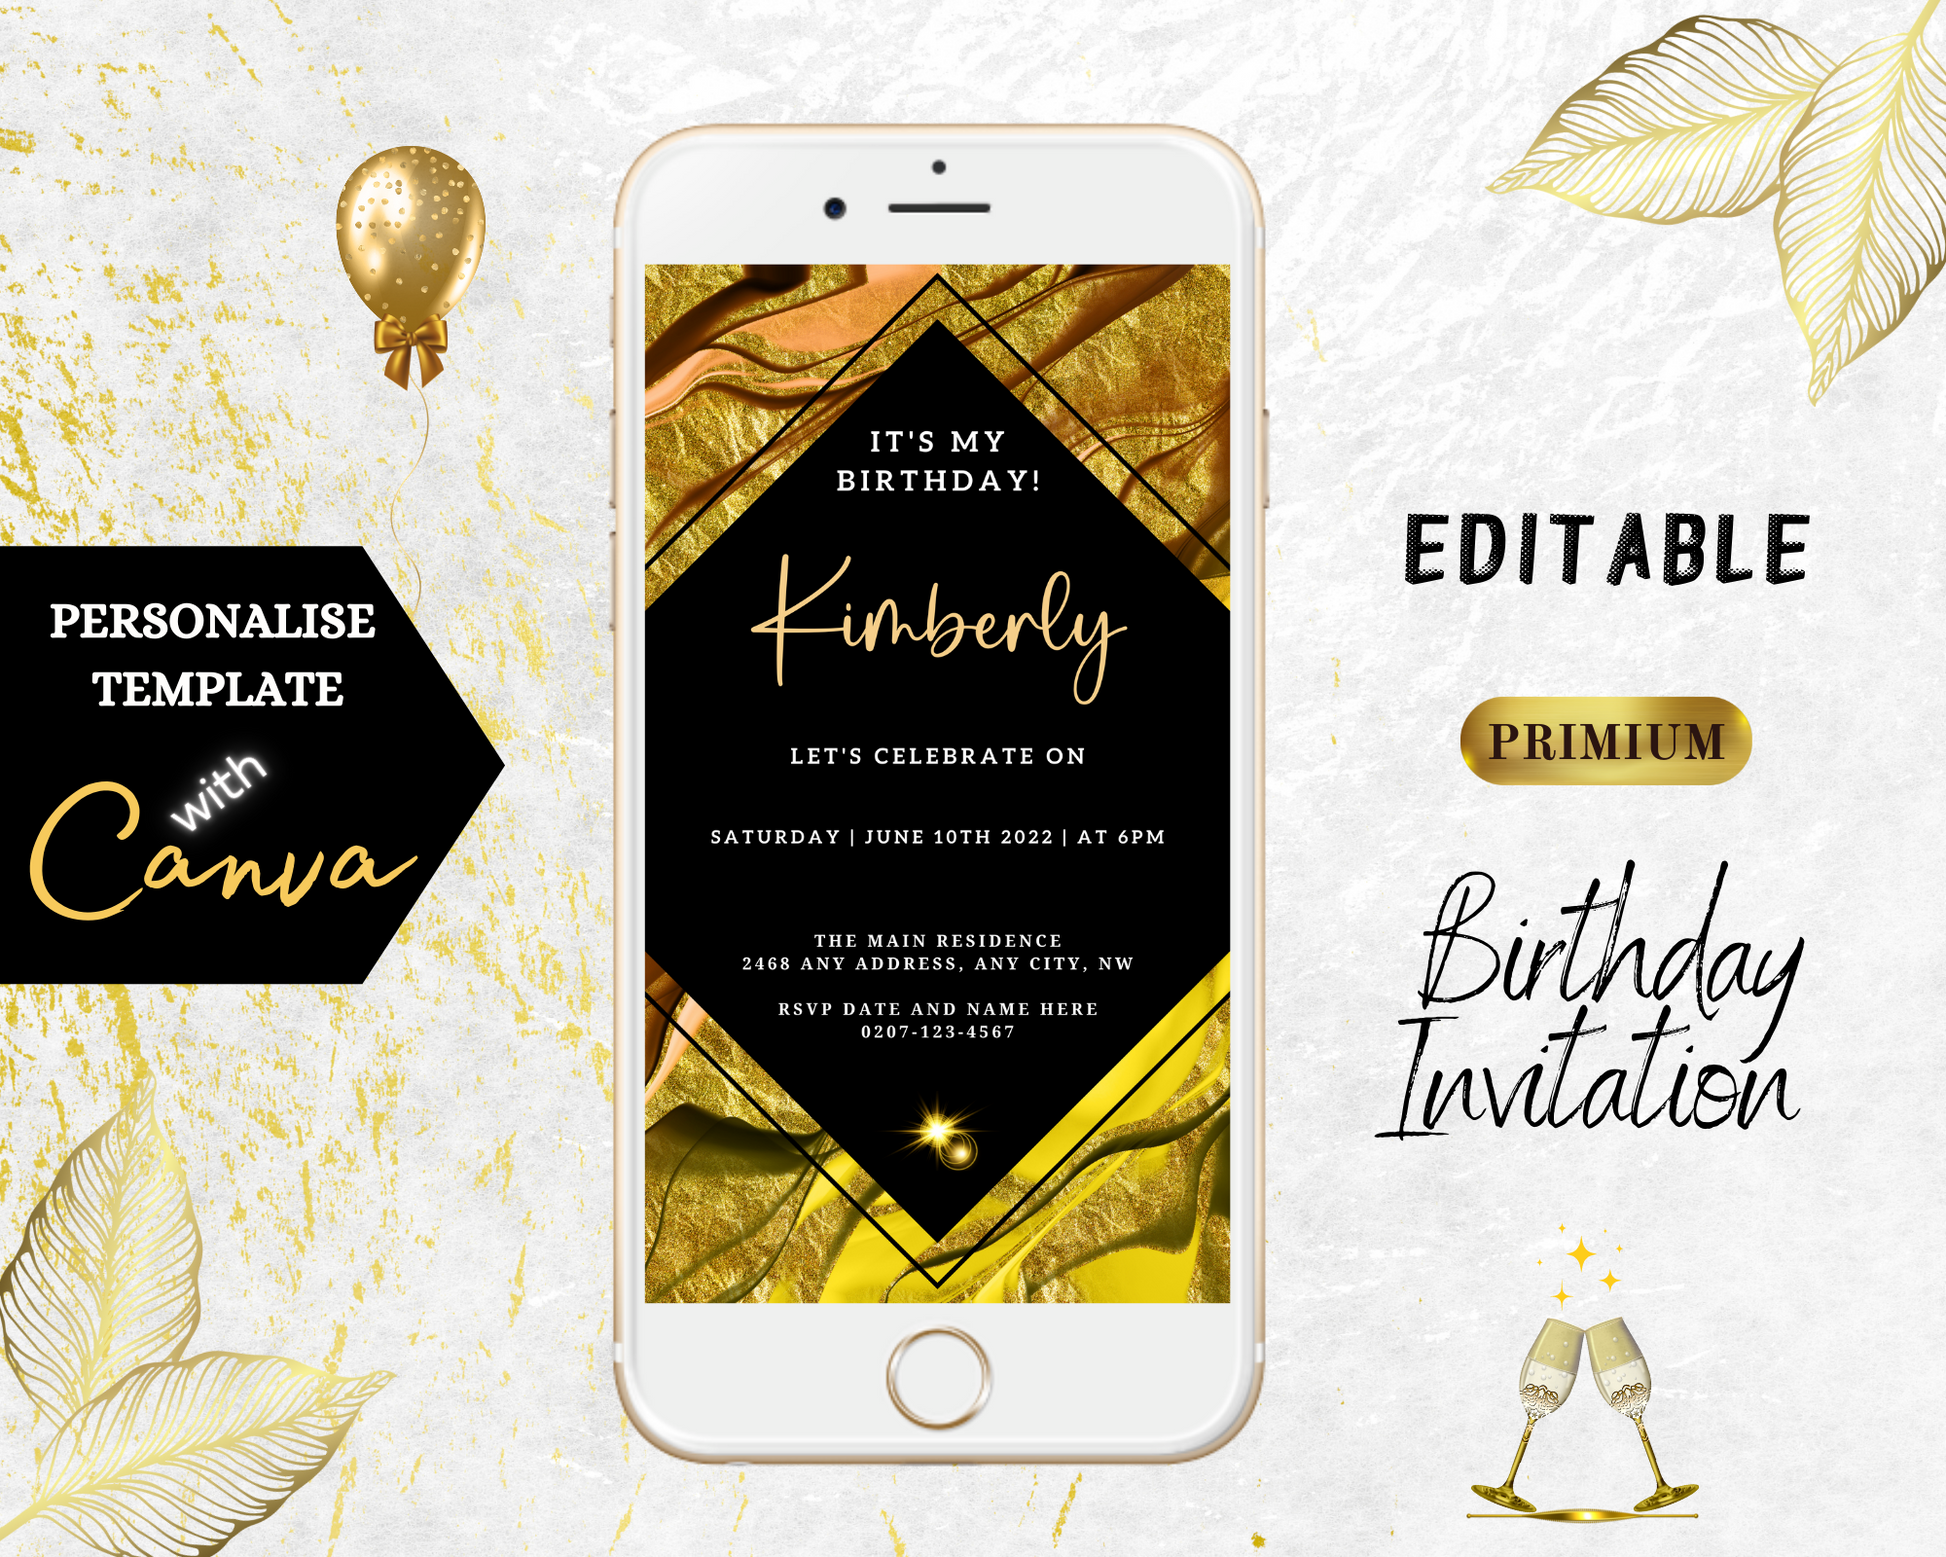 Gold Black Ankara Editable Birthday Evite displayed on a white smartphone screen, with invitation text and gold decorative elements visible.